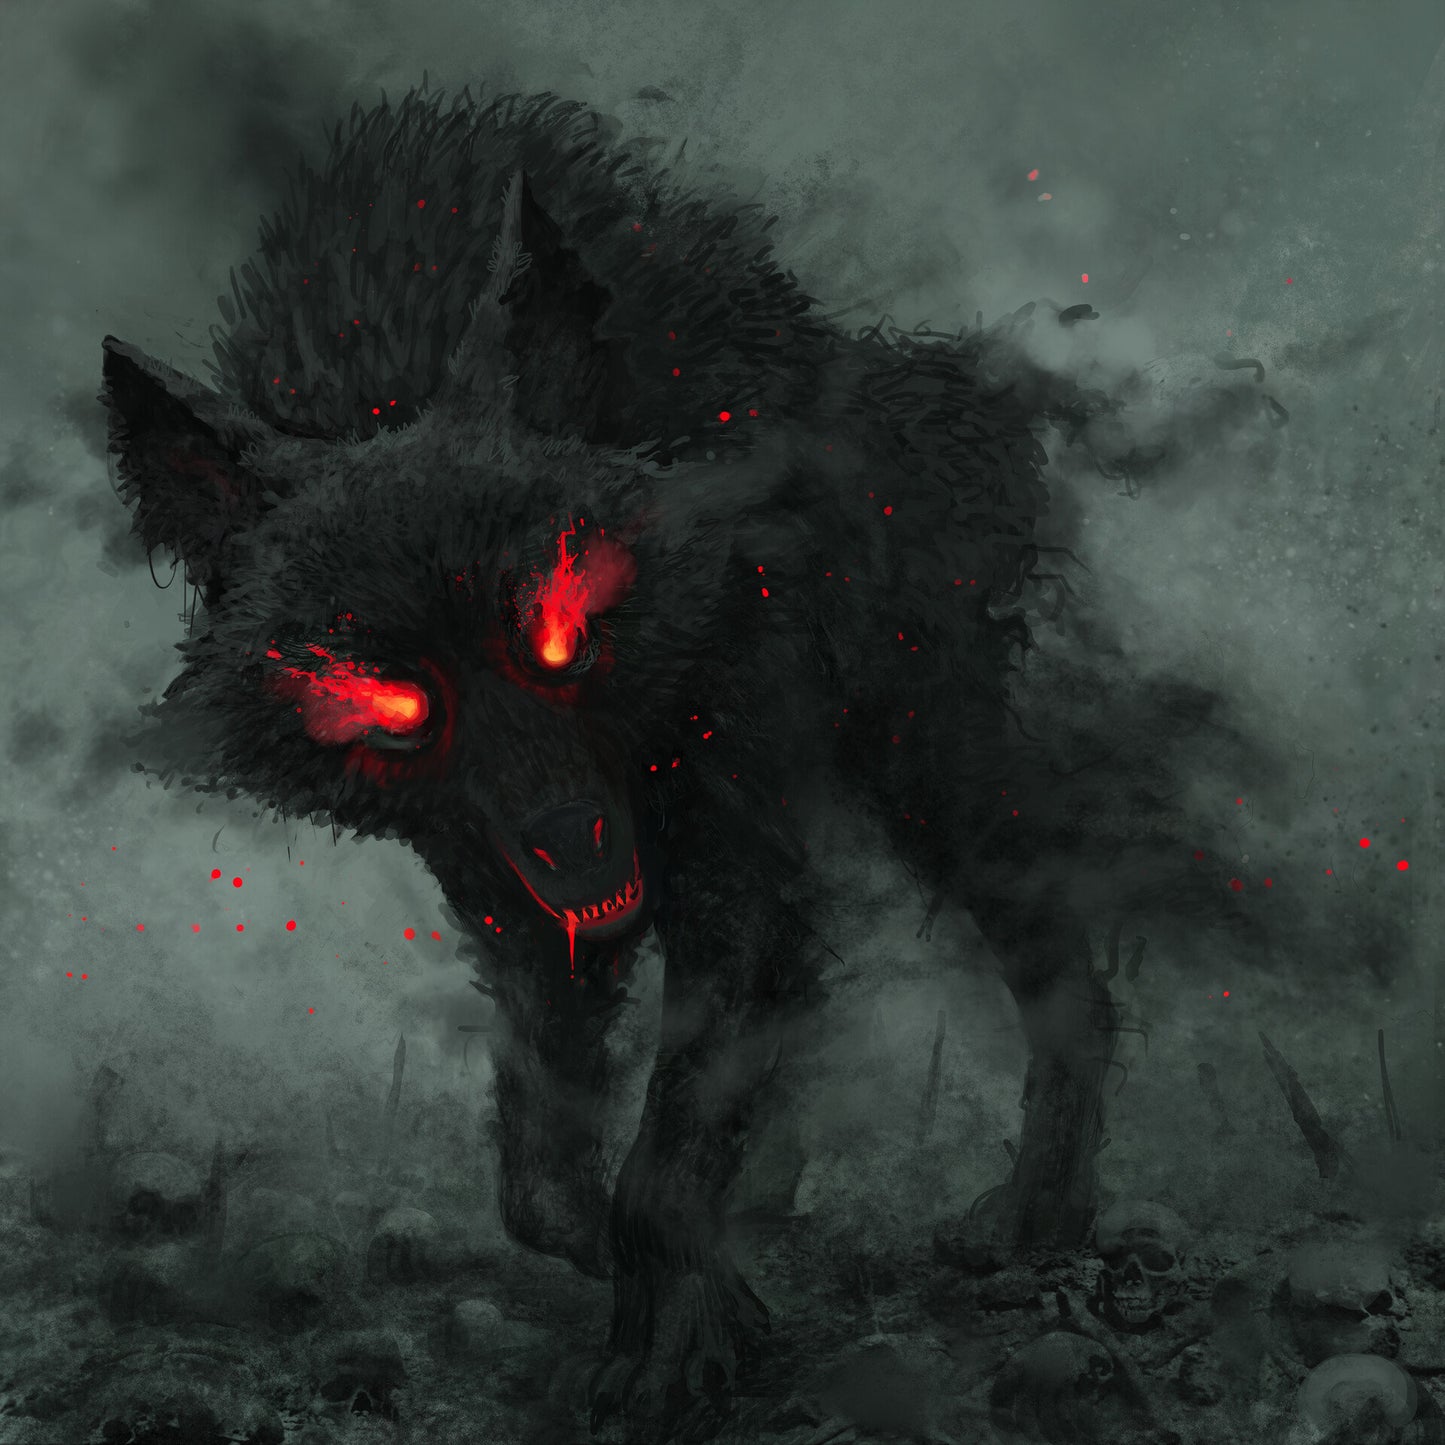 Guardian HellHound / Hounds of Hell / Black Dog - Vessel or Direct/Remote Bind